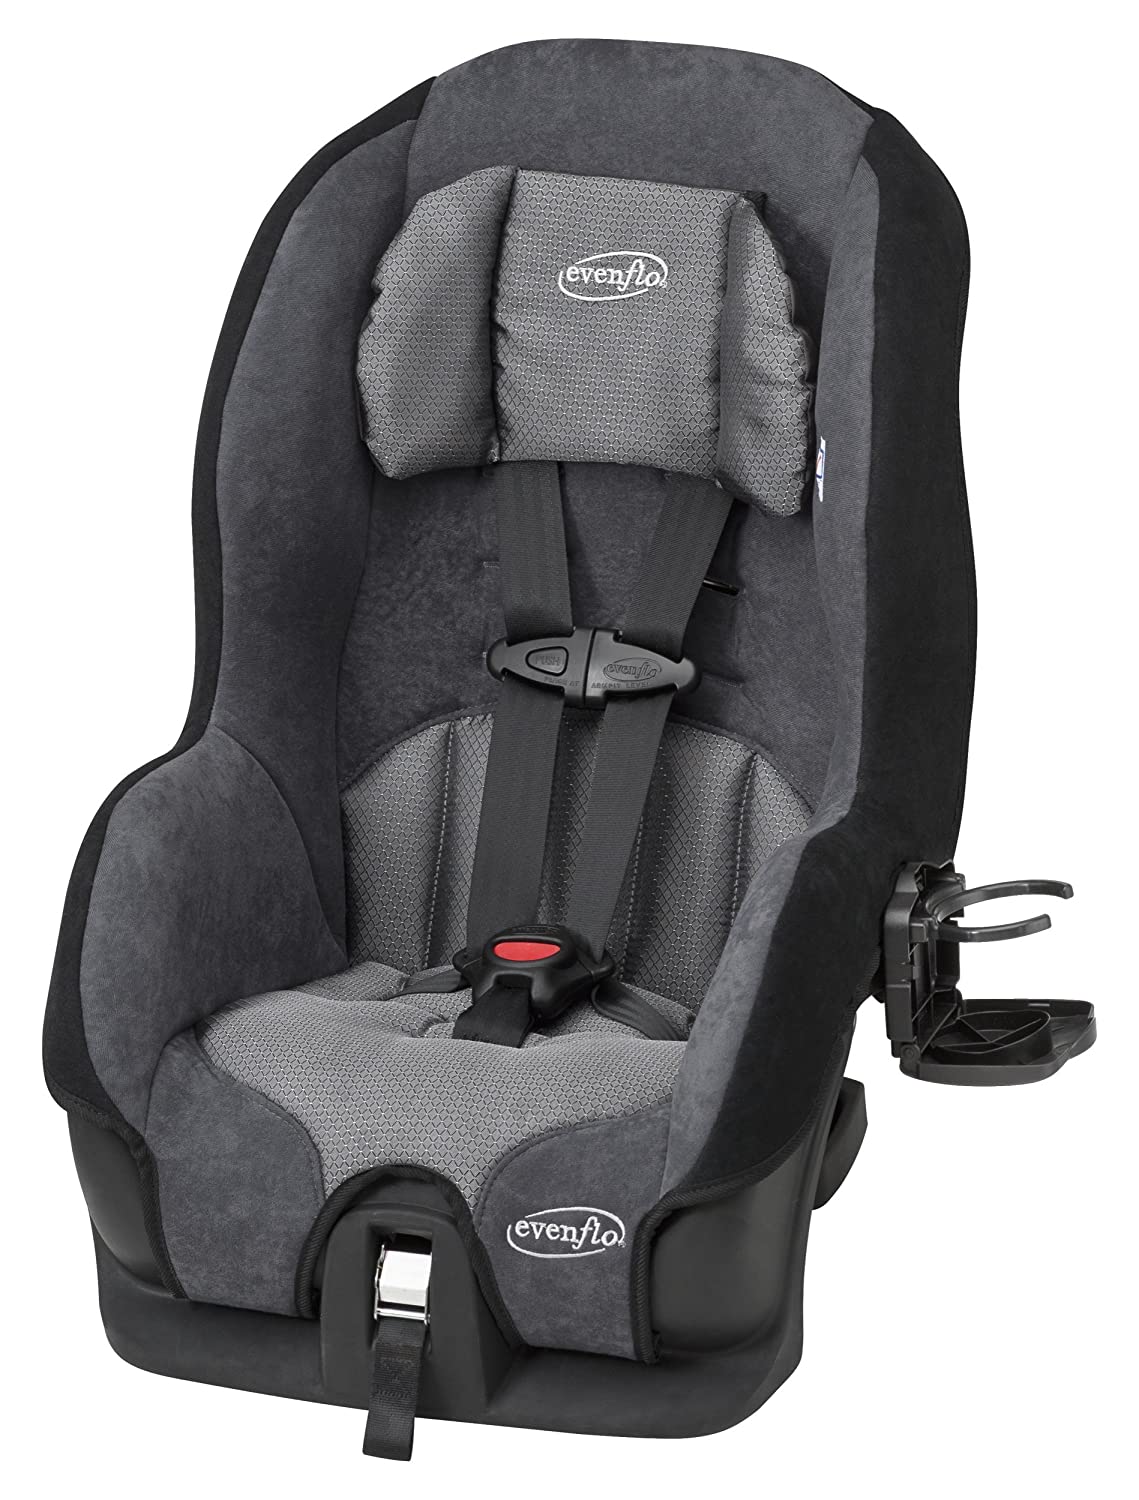 The Best Convertible Car Seat March 22